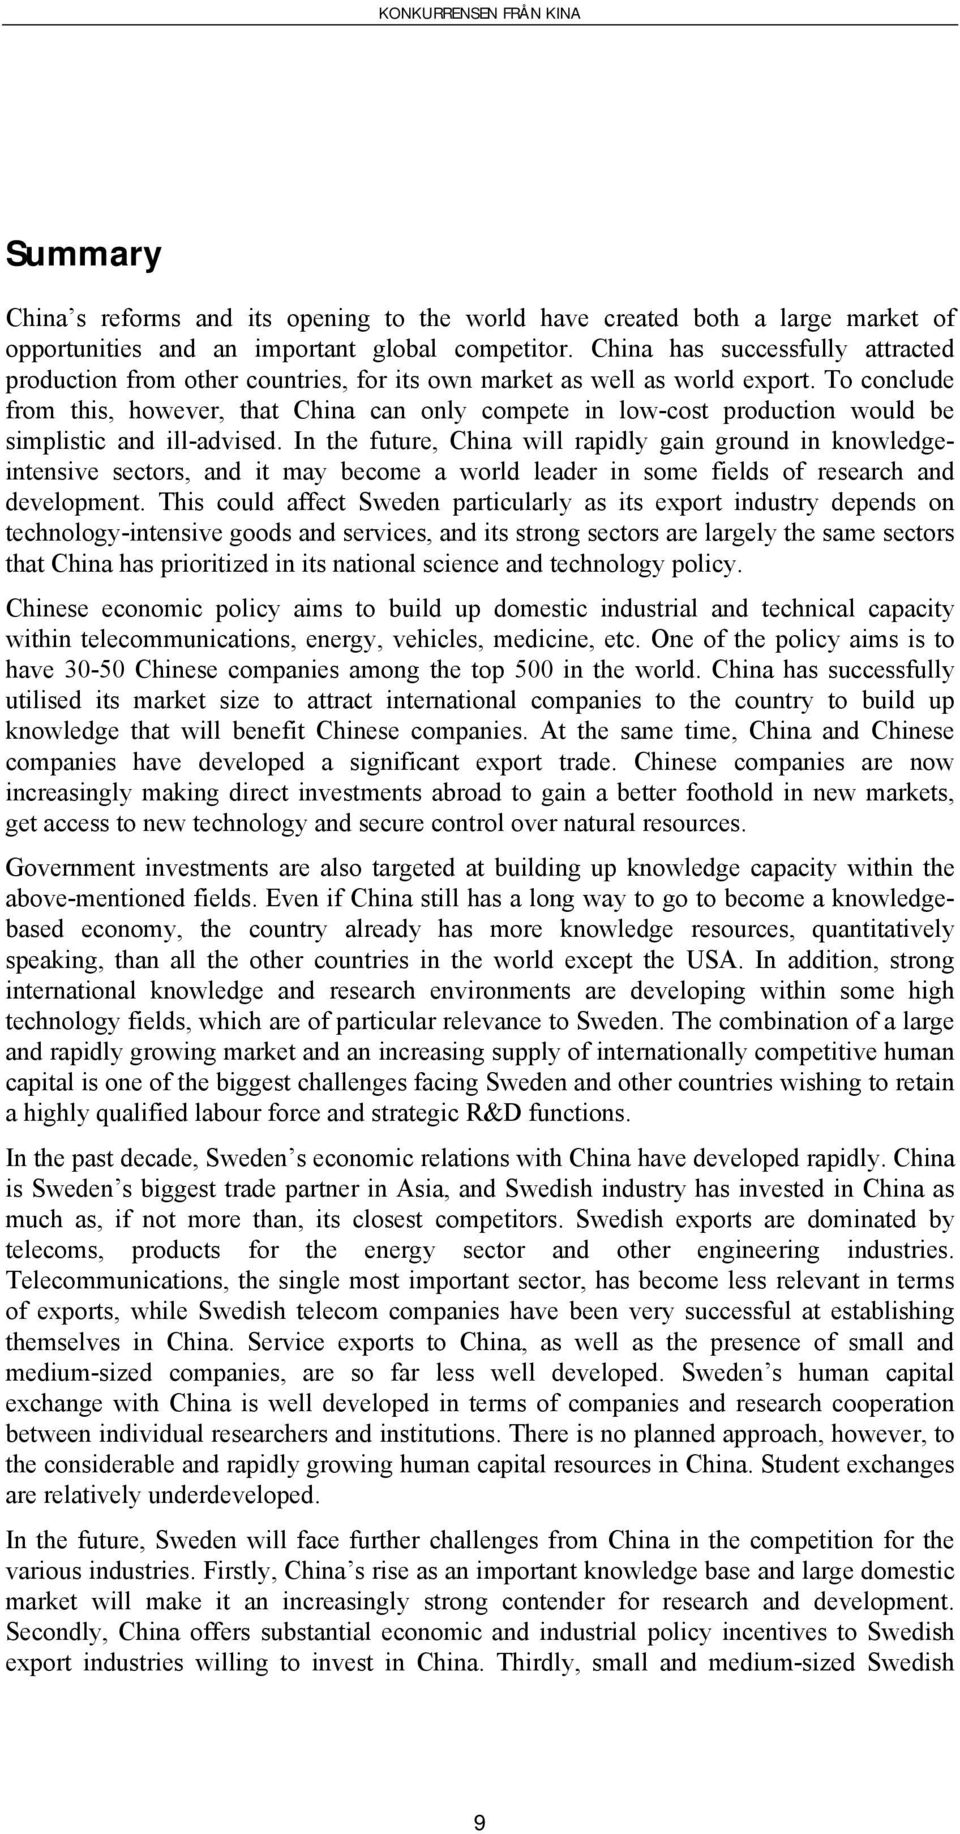 To conclude from this, however, that China can only compete in low-cost production would be simplistic and ill-advised.